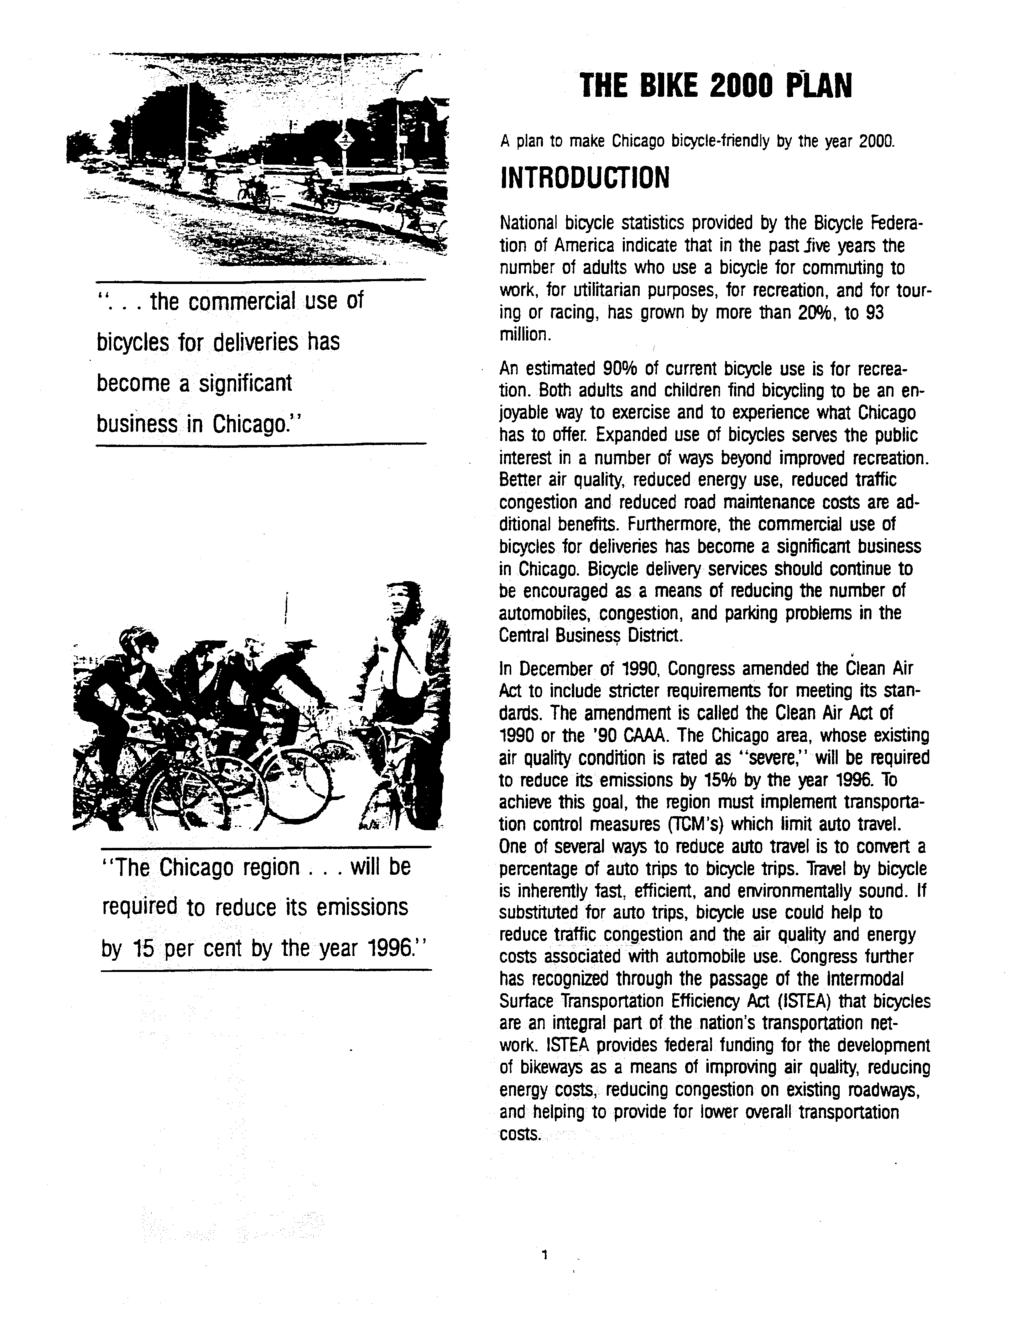 THE BIKE 2000 PlAN A plan to make Chicago bicycle-friendly by the year 2000. INTRODUCTION "... the commercial use of bicycles for deliveries has become a significant business in Chicago.